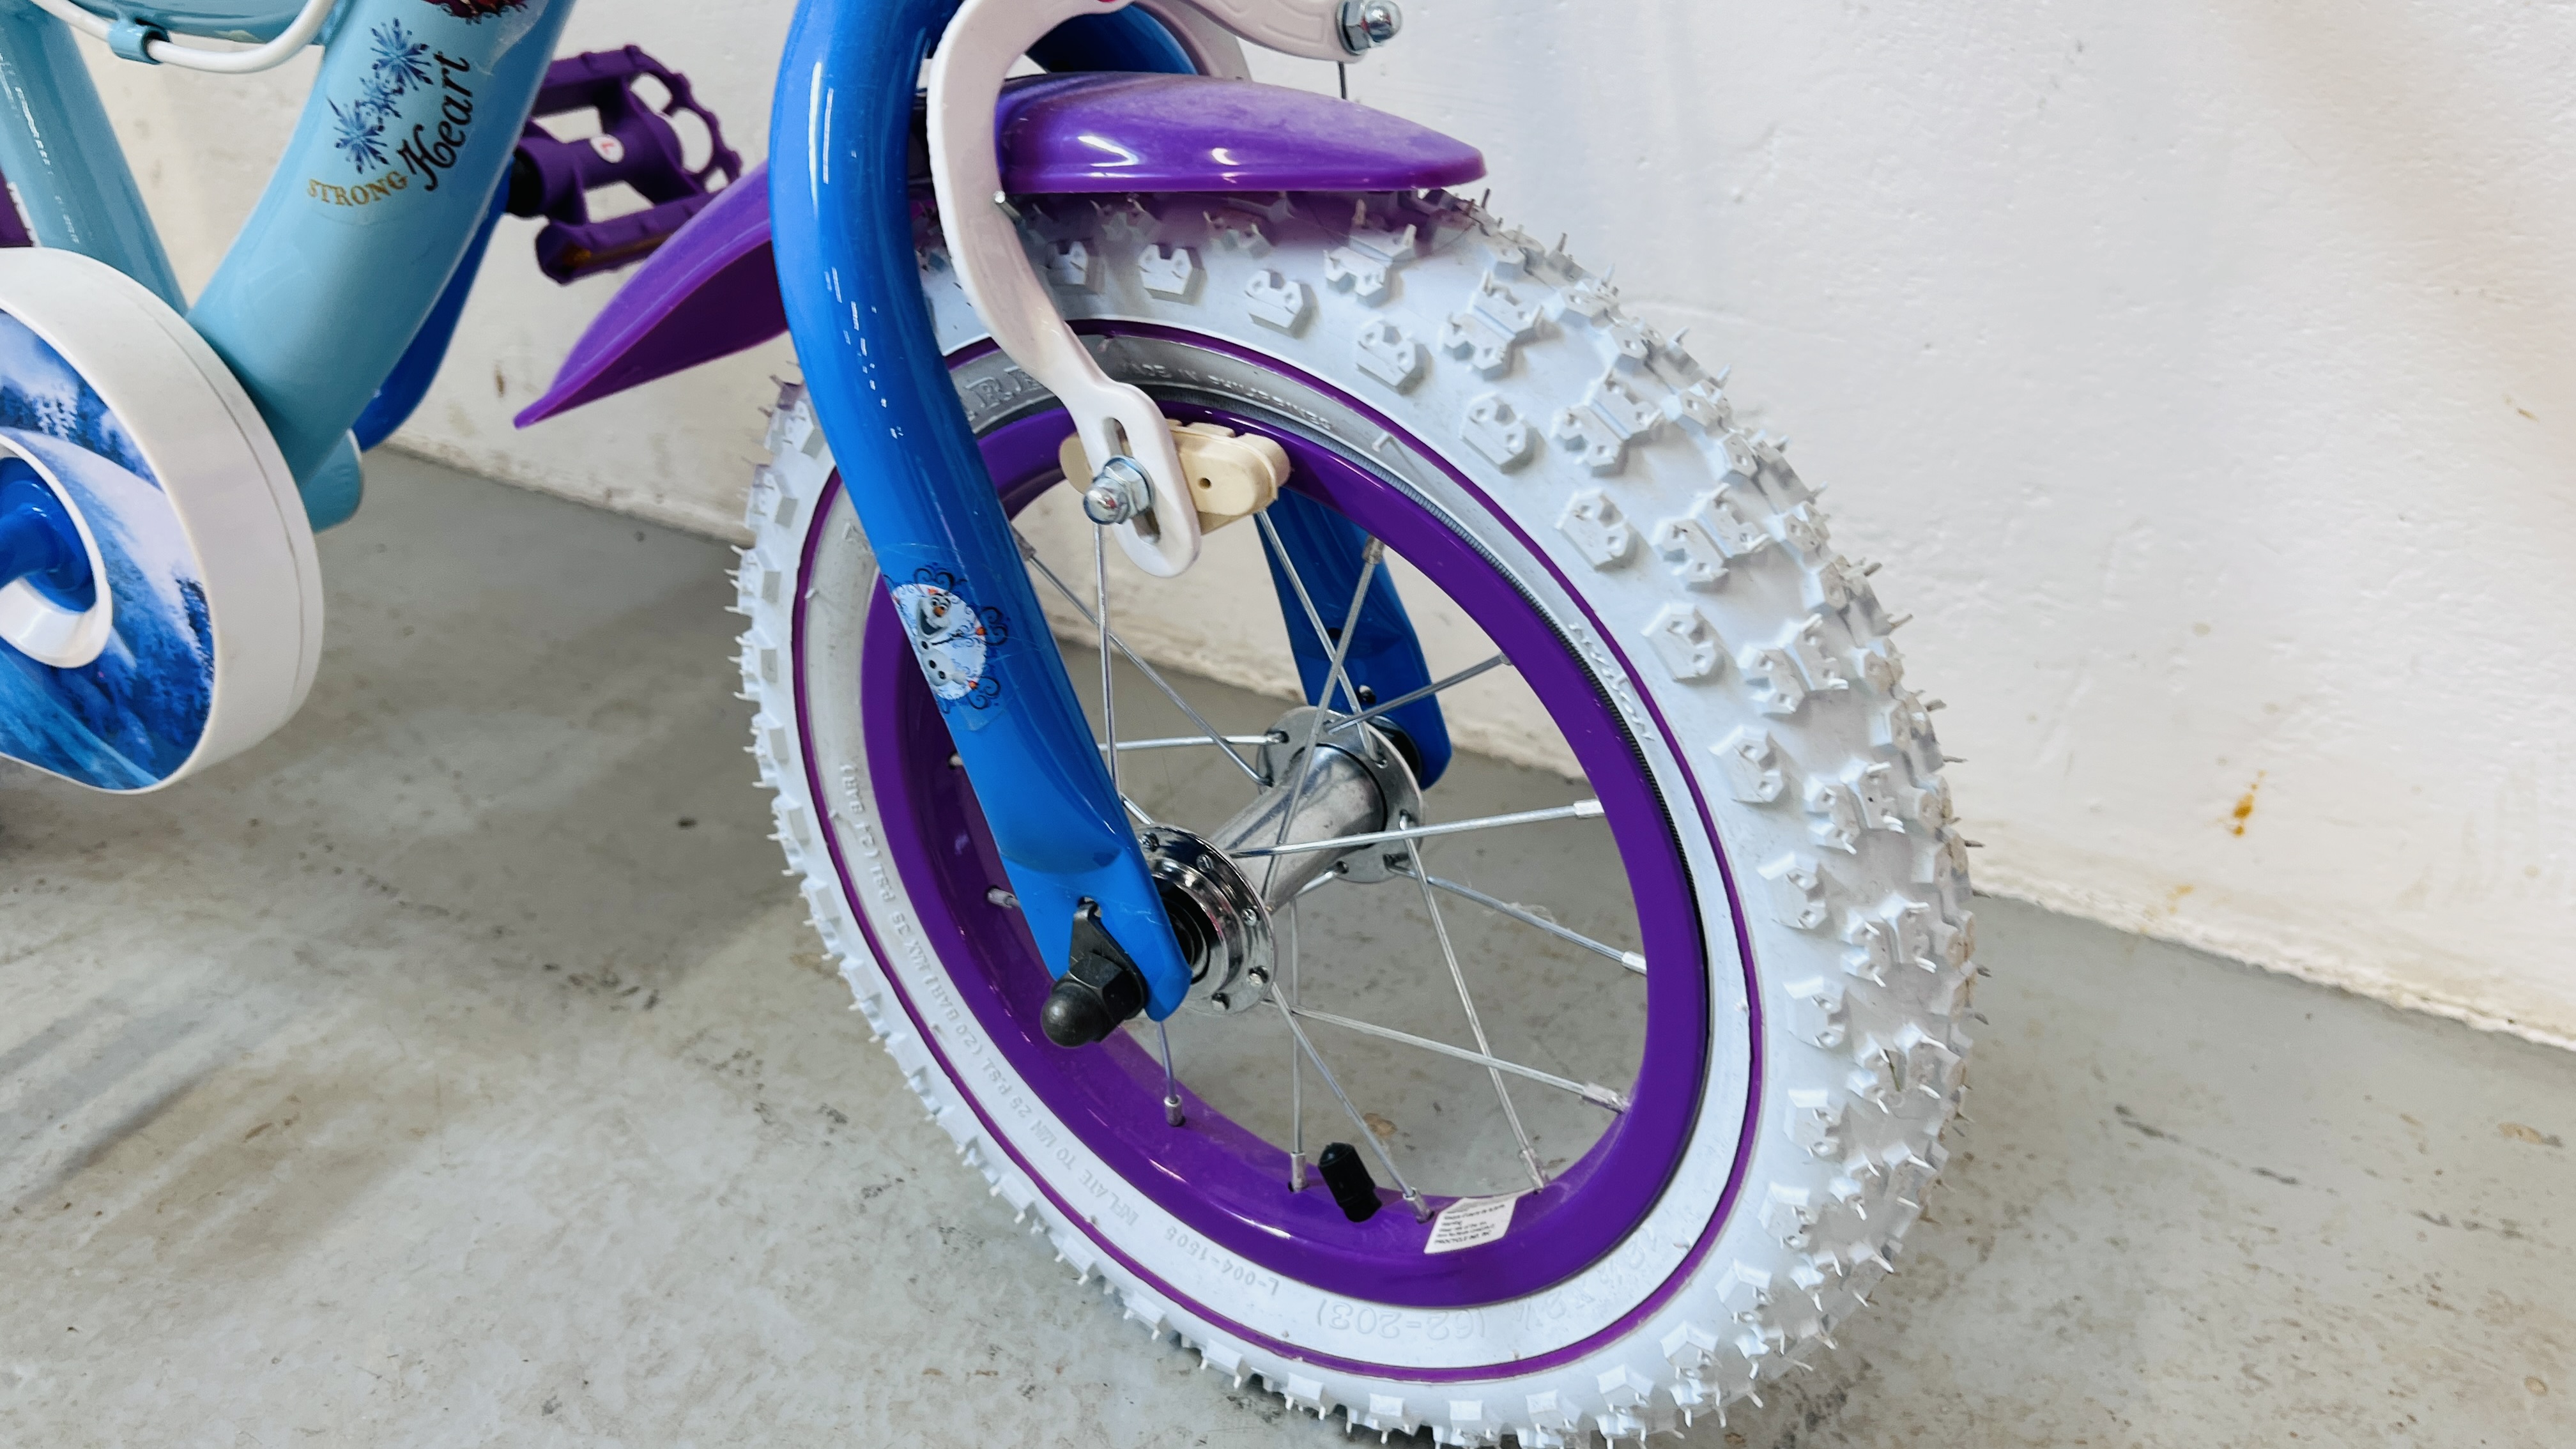 AN AS NEW GIRLS BIKE WITH STABLISIERS "FROZEN" RELATED. - Image 5 of 9